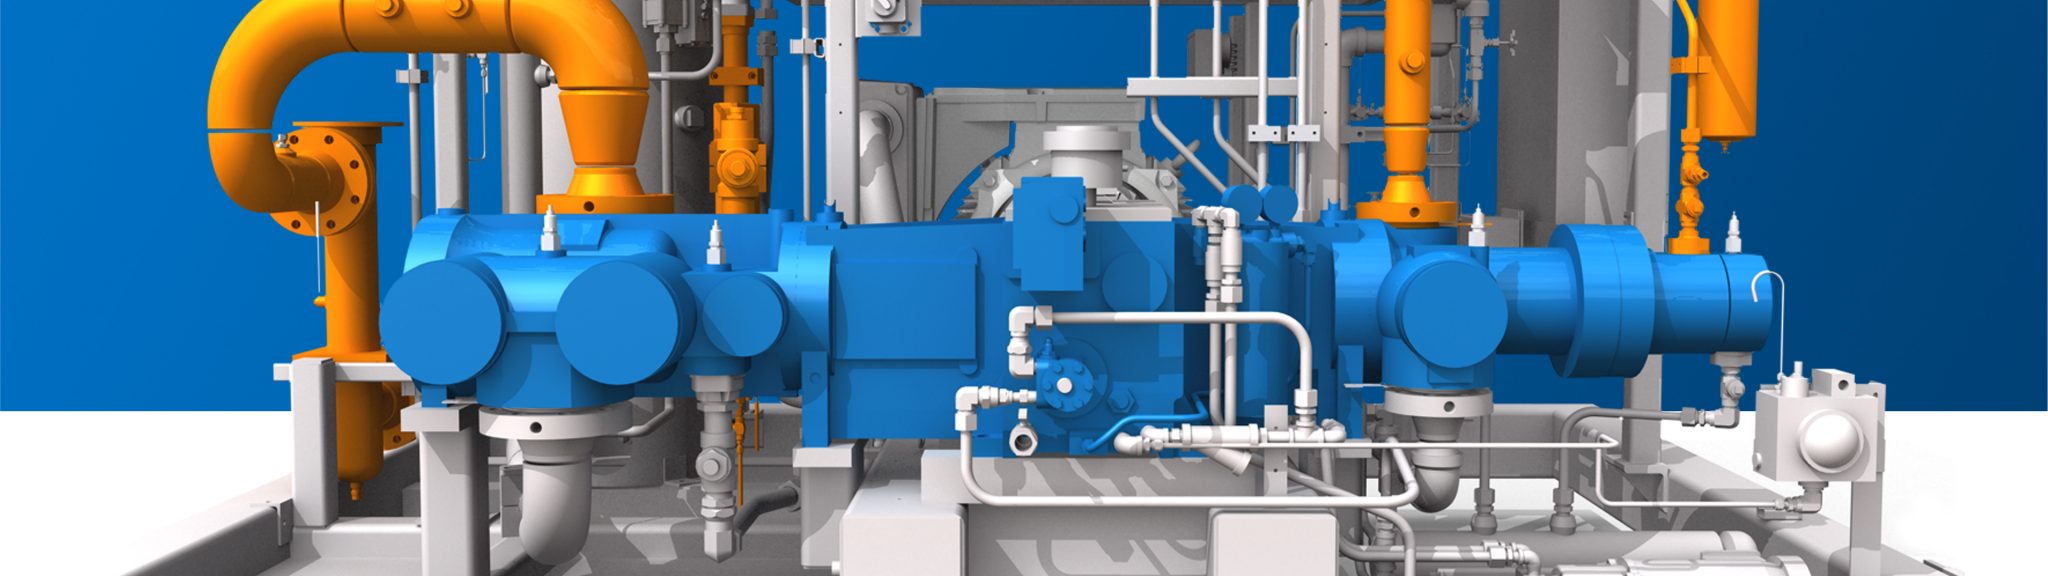 A rendering of an Ariel CNG Compressor within a CNG Station